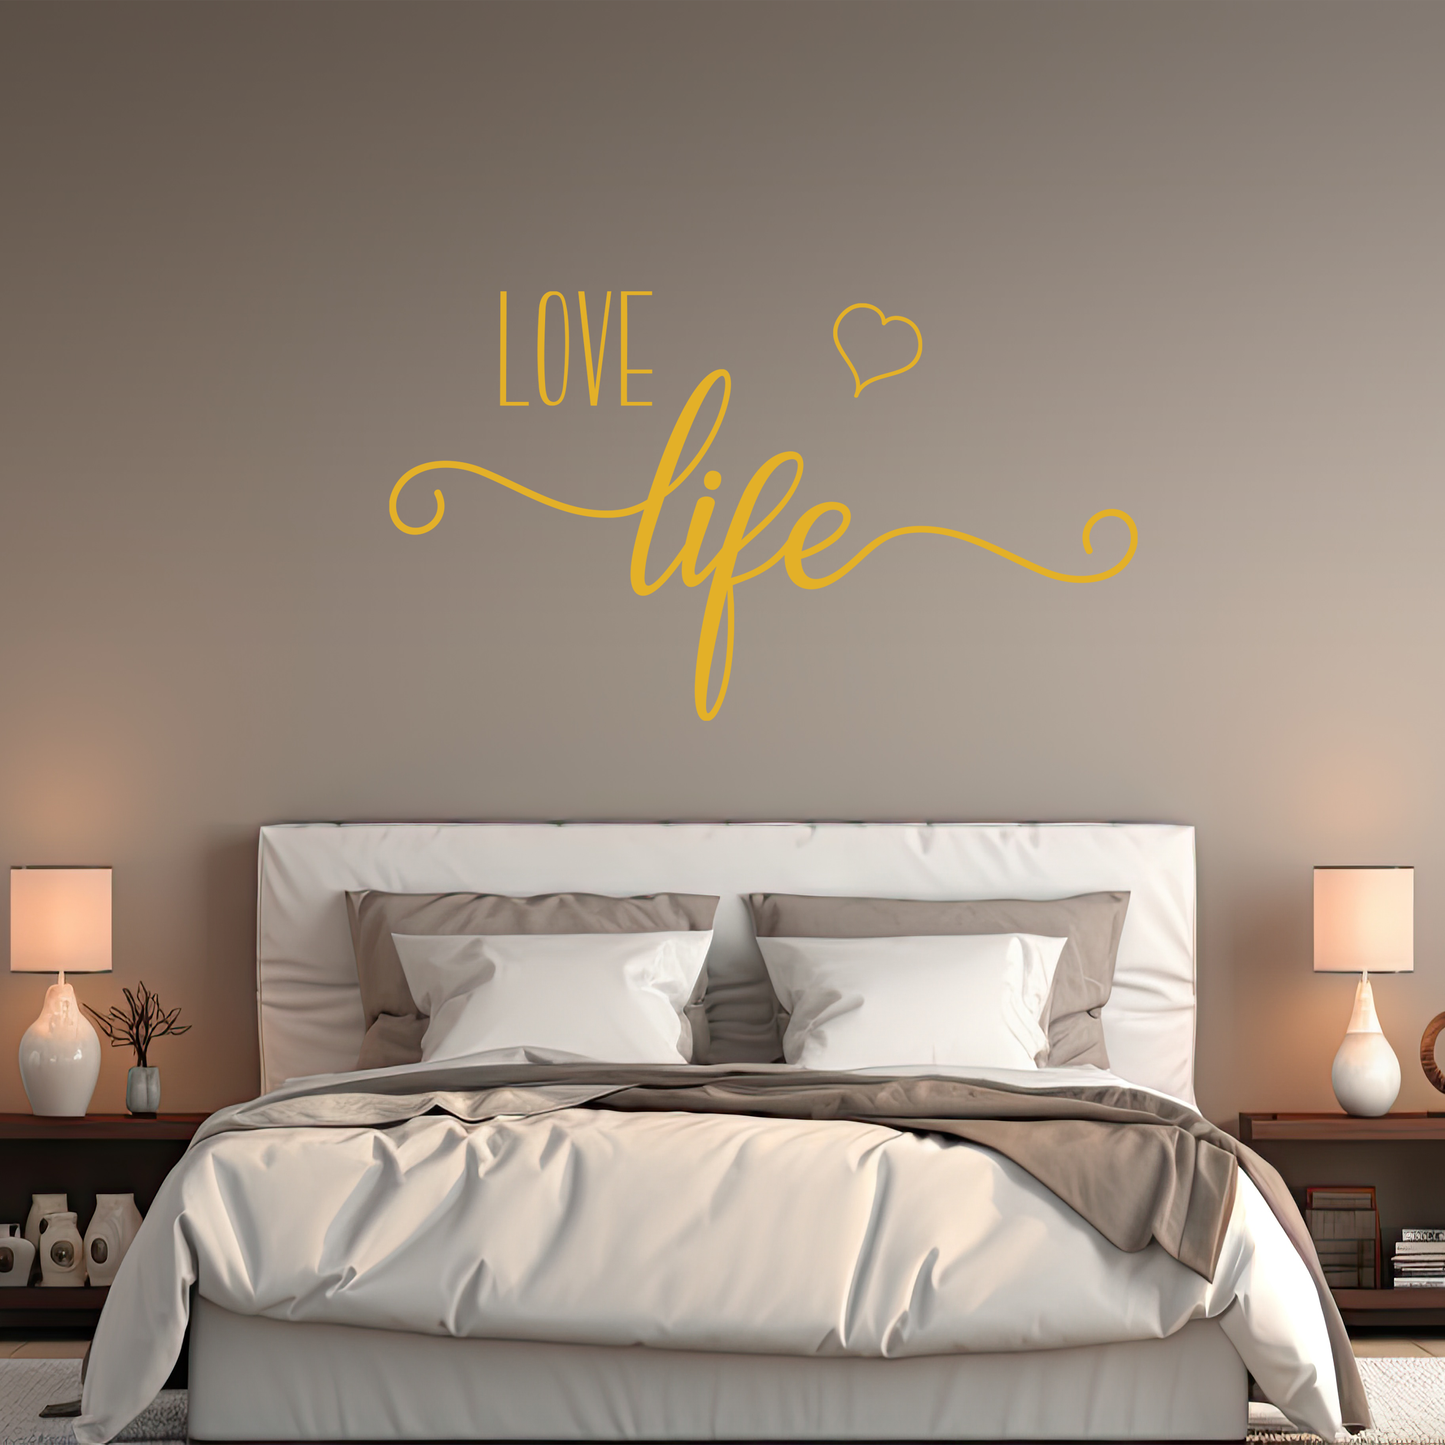 Love Life Wall Sticker Decal